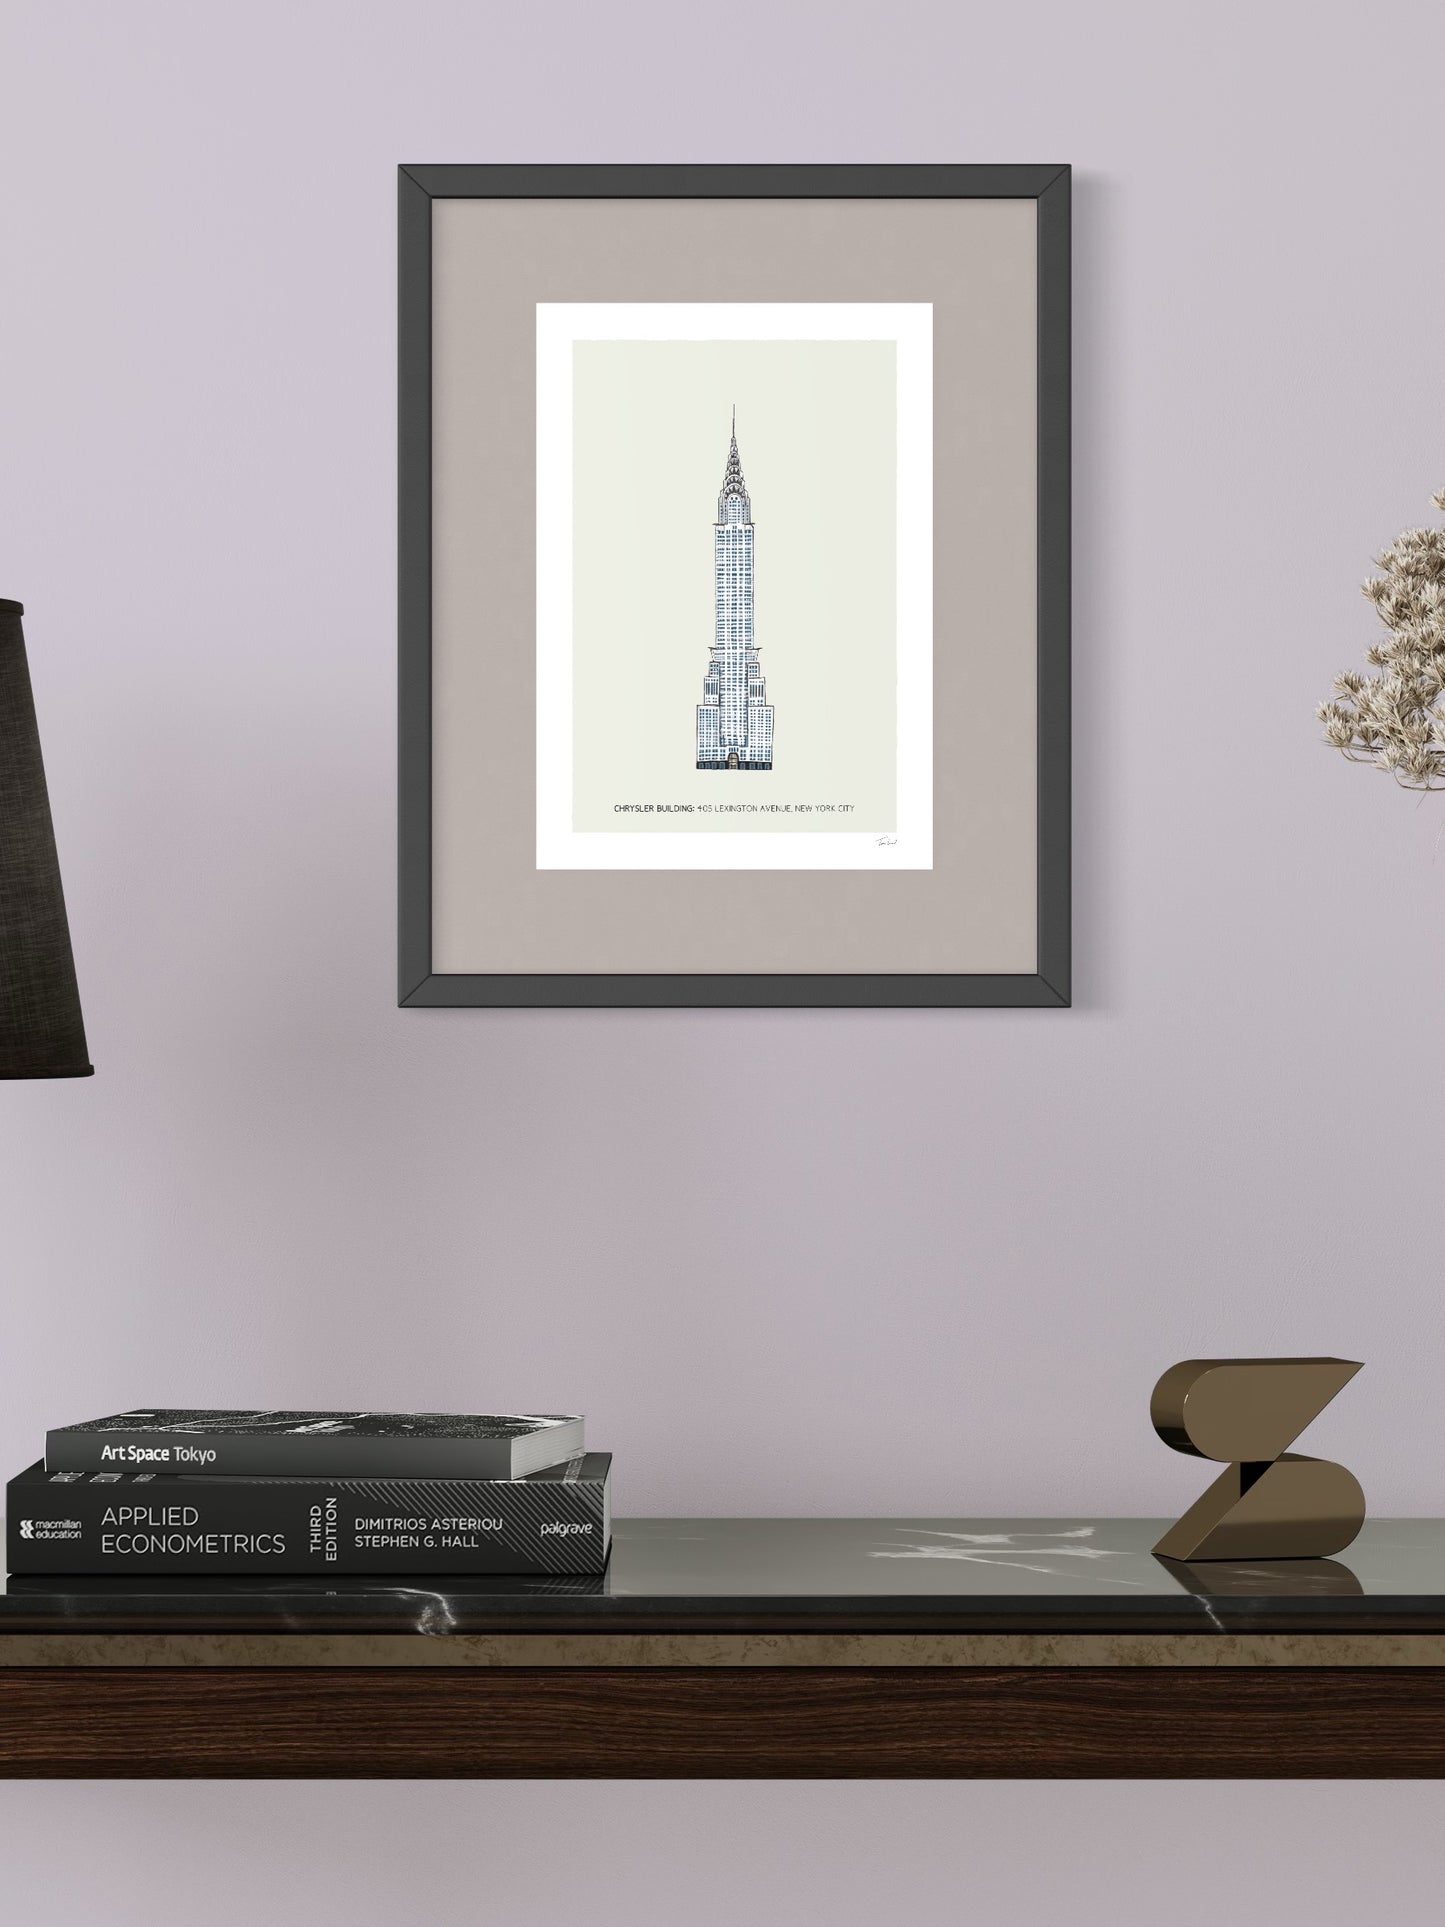 This image shows a giclee wall art print by Tom Laird Illustration of the world-famous New York City landmark the Chrysler Building, framed in a beautiful living room with tasteful modern home decor. This art print is available from Tom Laird Illustration in A4 size.